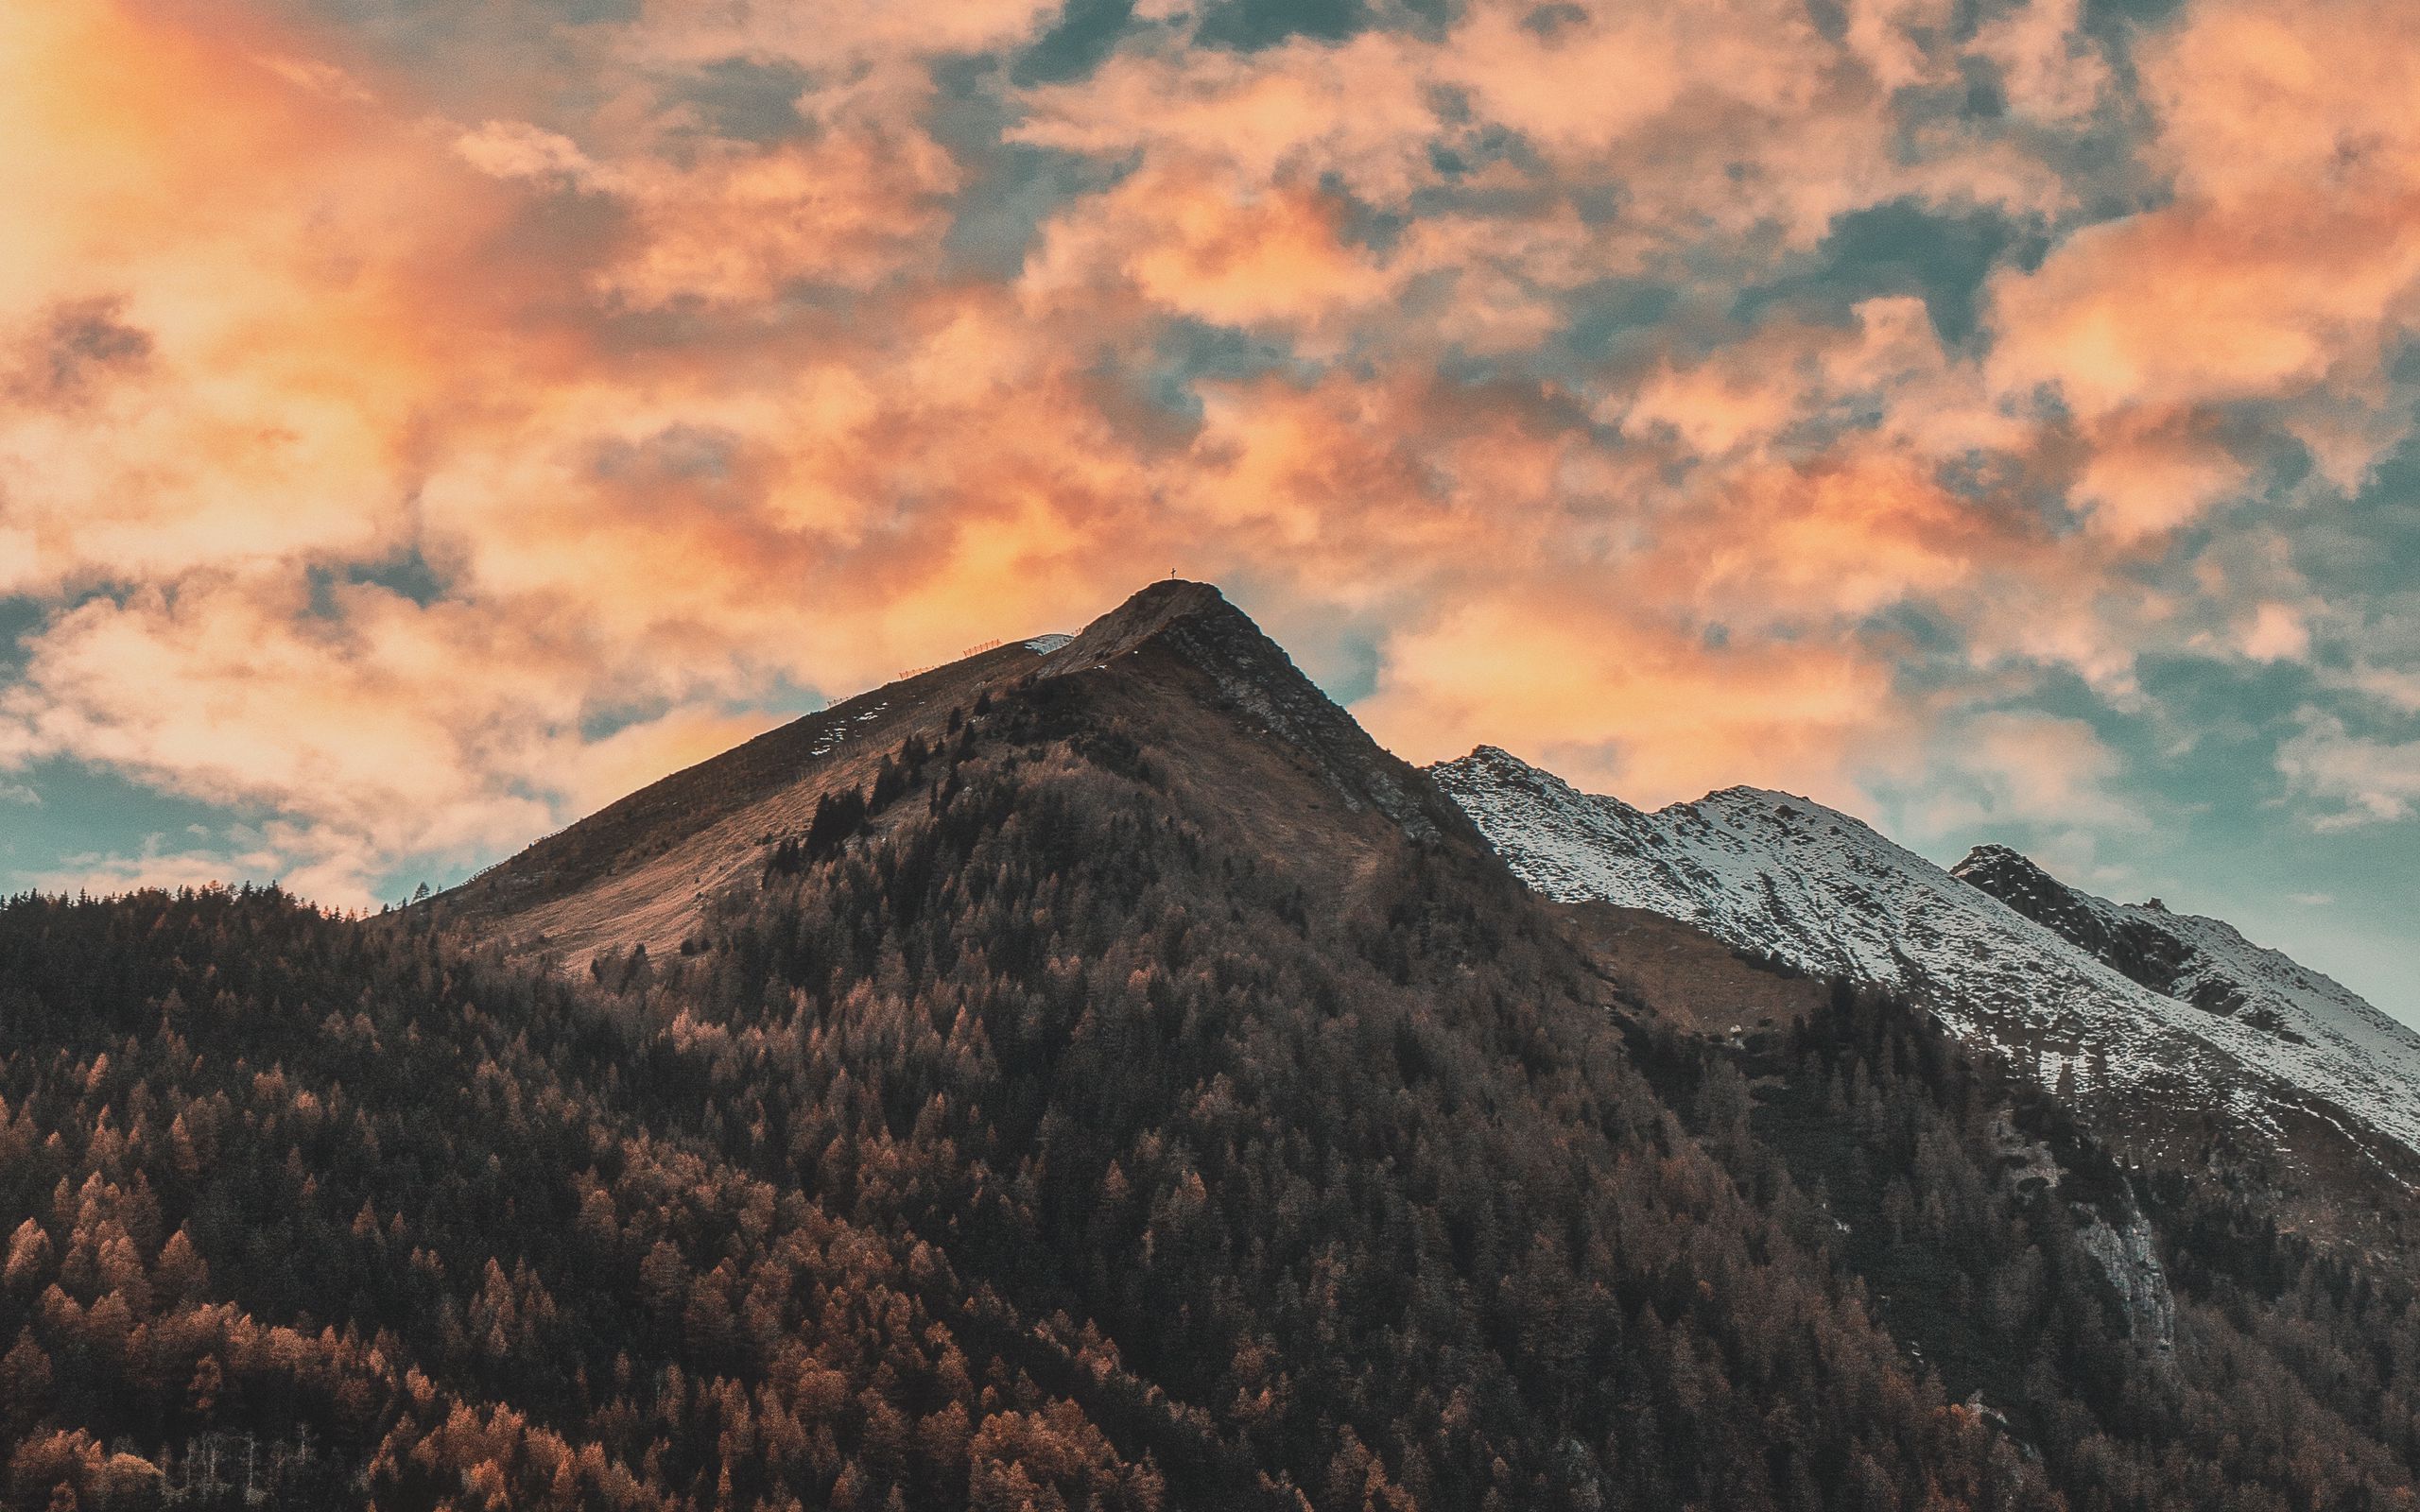 Download wallpaper 2560x1600 mountains, trees, clouds, sky, autumn, zillertal alps, italy widescreen 16:10 HD background